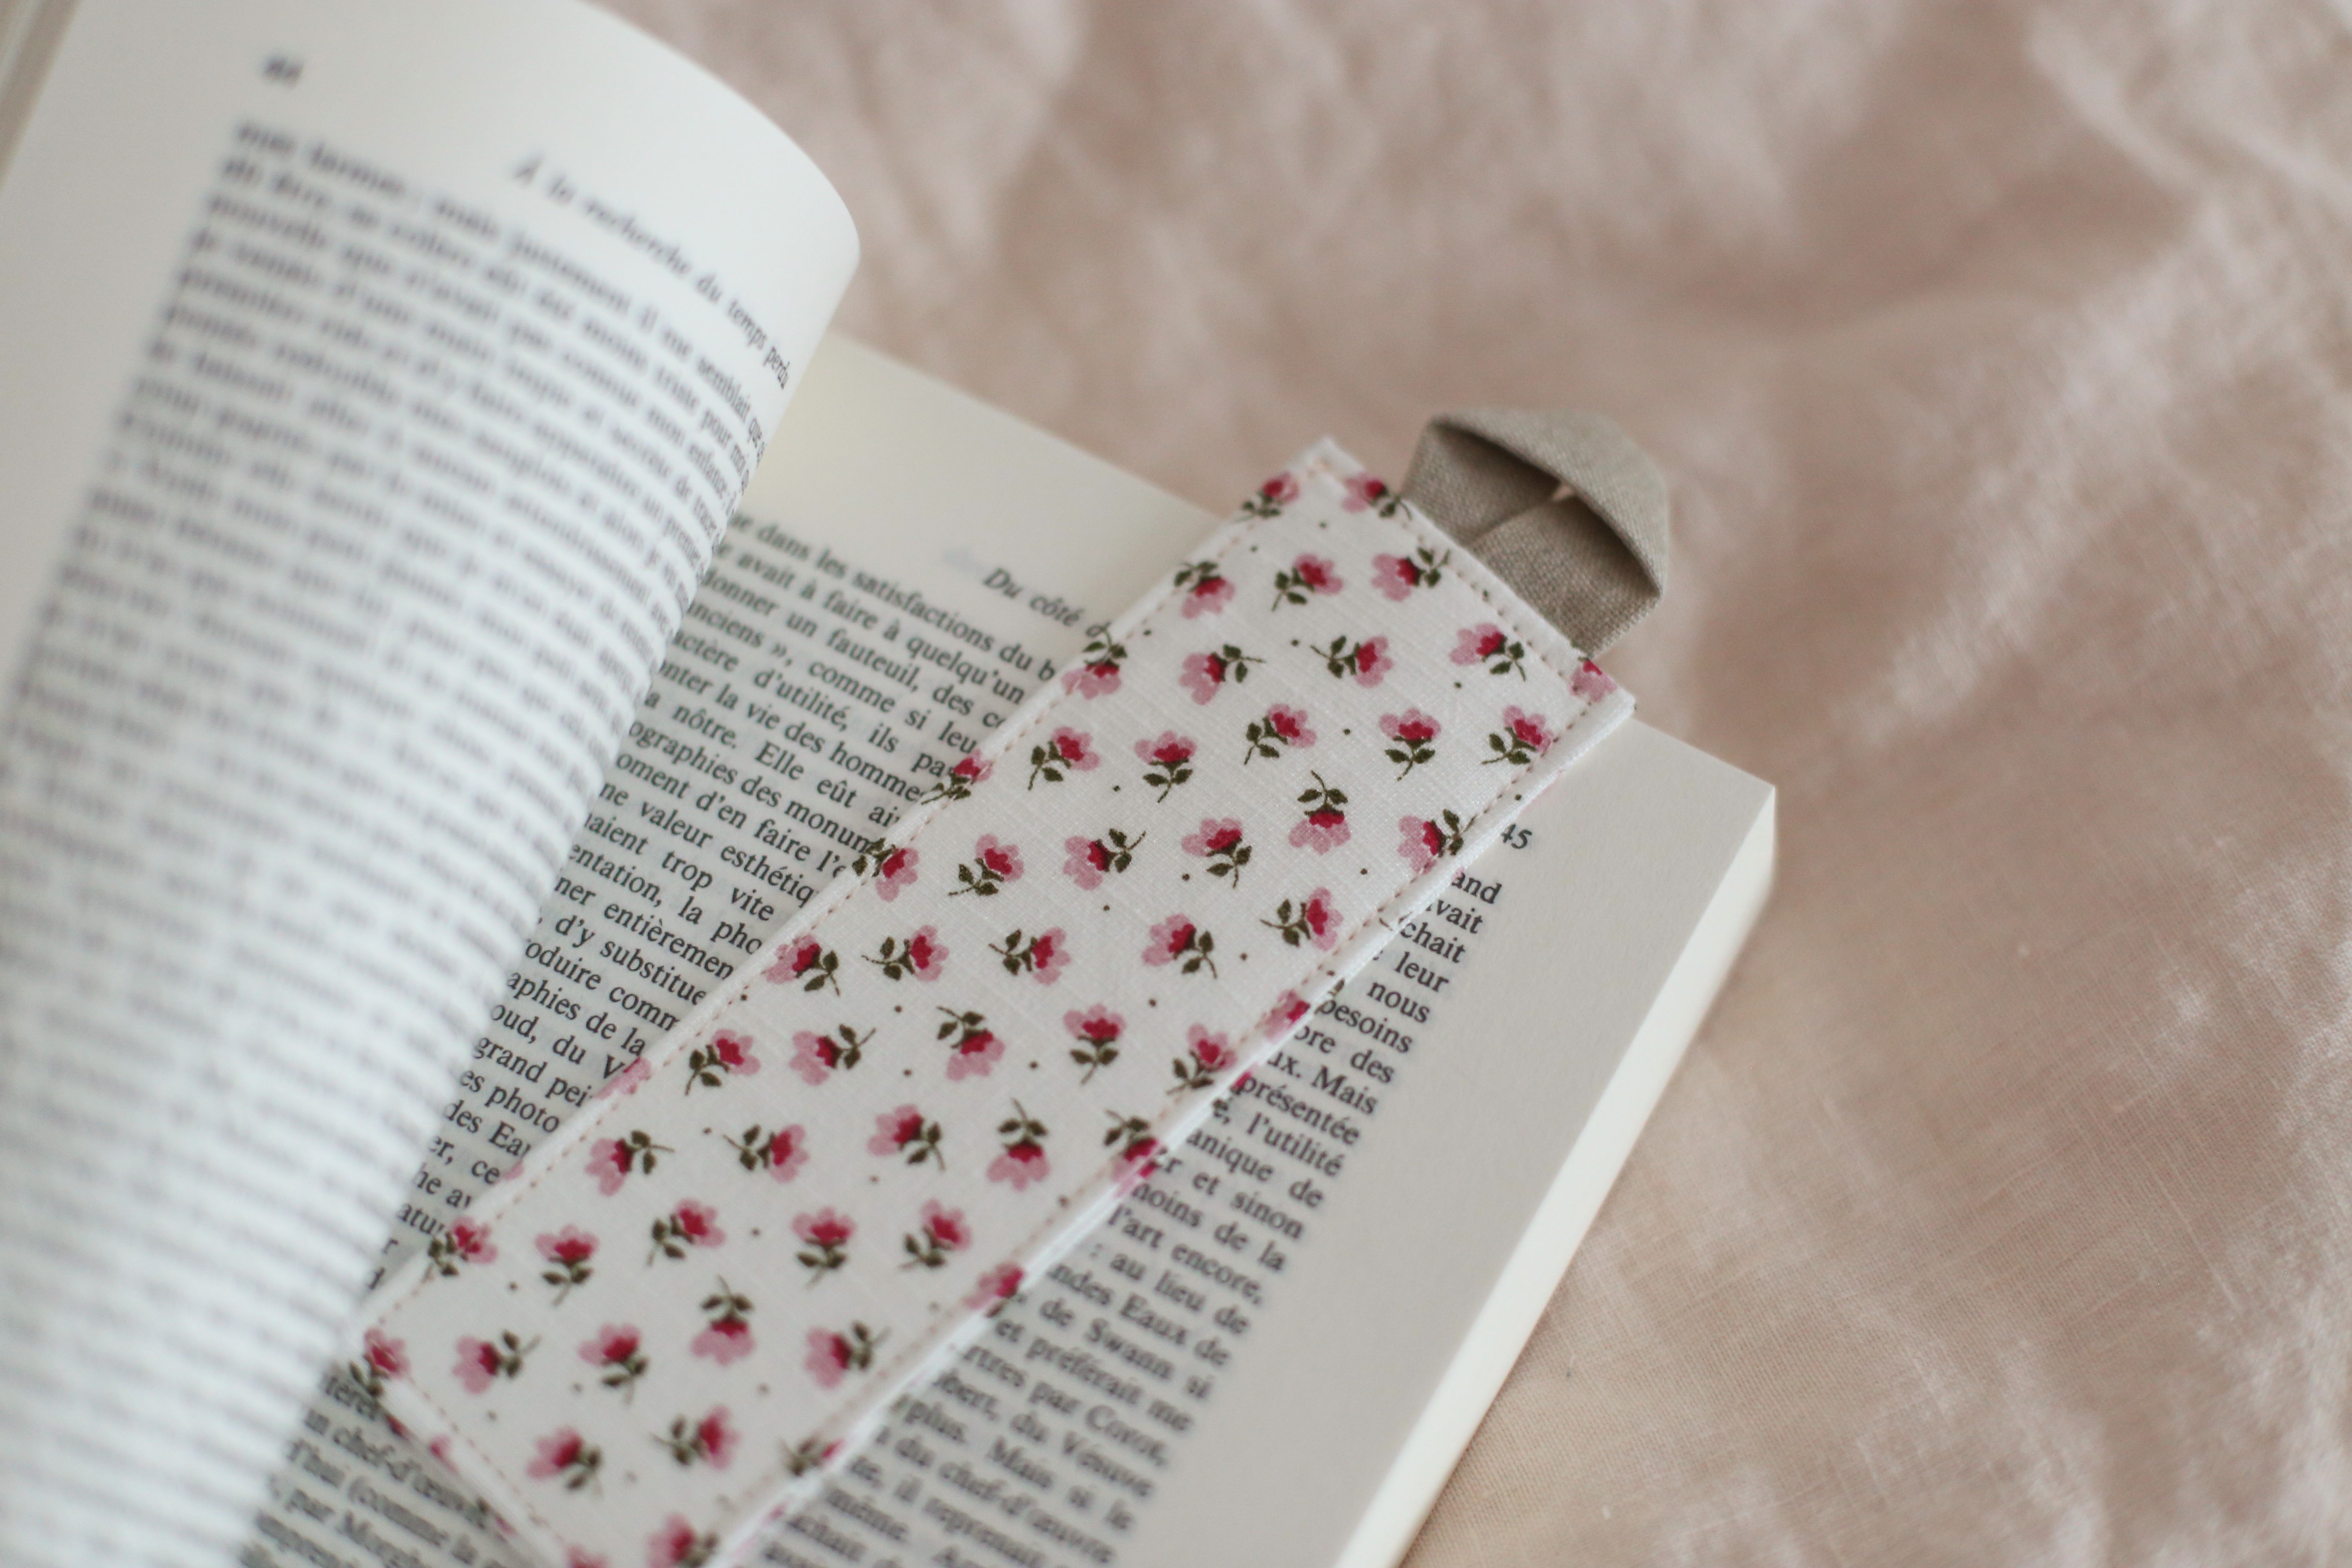 Bookmark "Our heart of Maupassant"